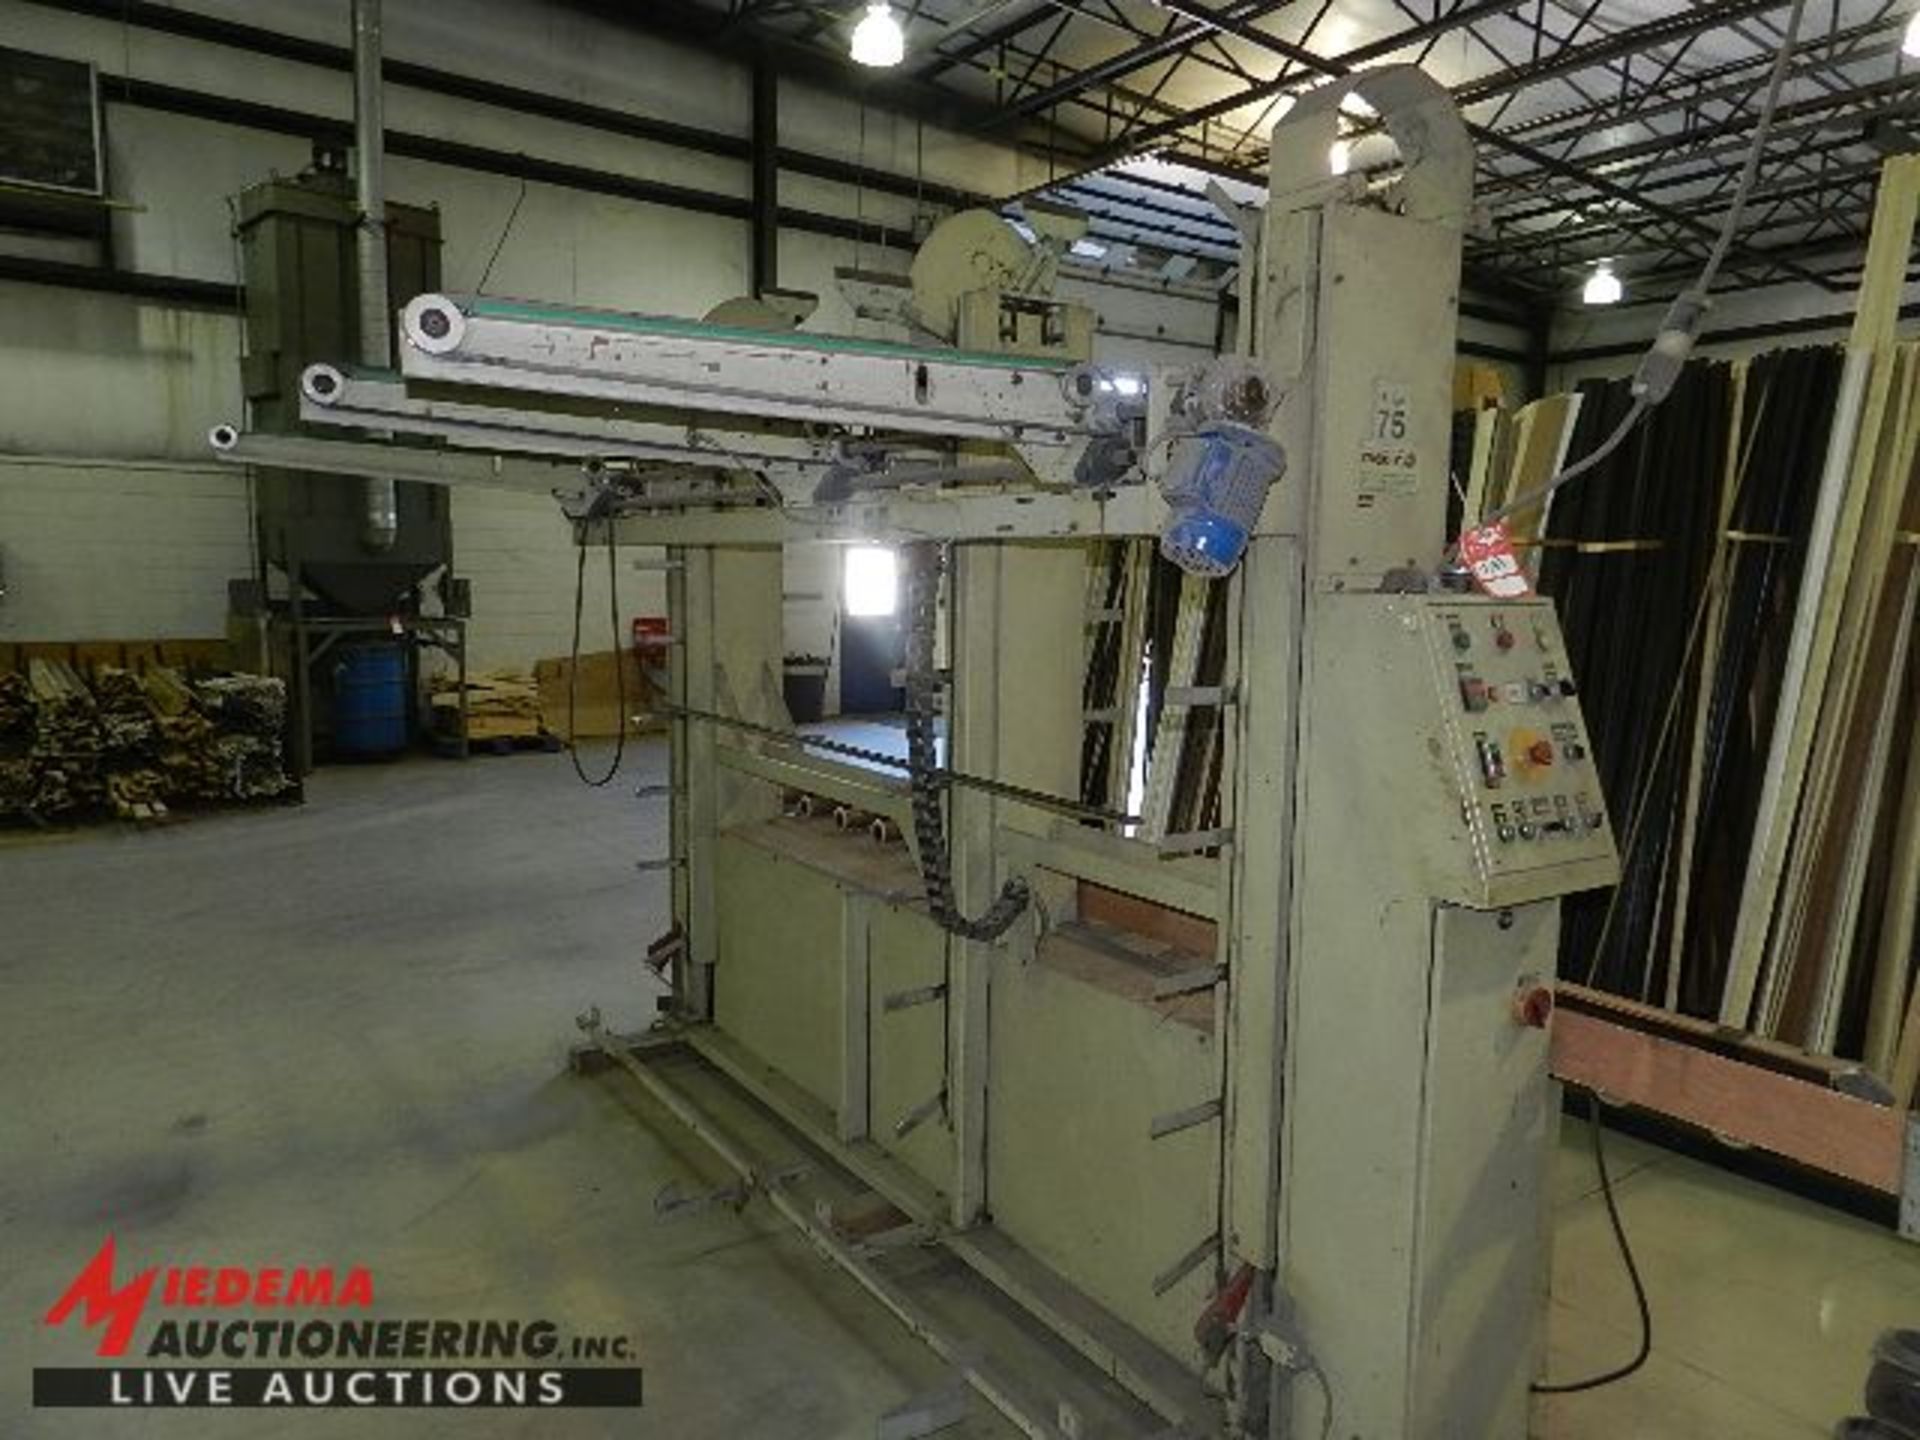 MAKOR AC-A3R MATERIAL STACKER, 1995, 3 POST, 48" STACKING ARMS, 9" ROLLER FEEDER CONVEYOR, S/N 5107 - Image 2 of 5